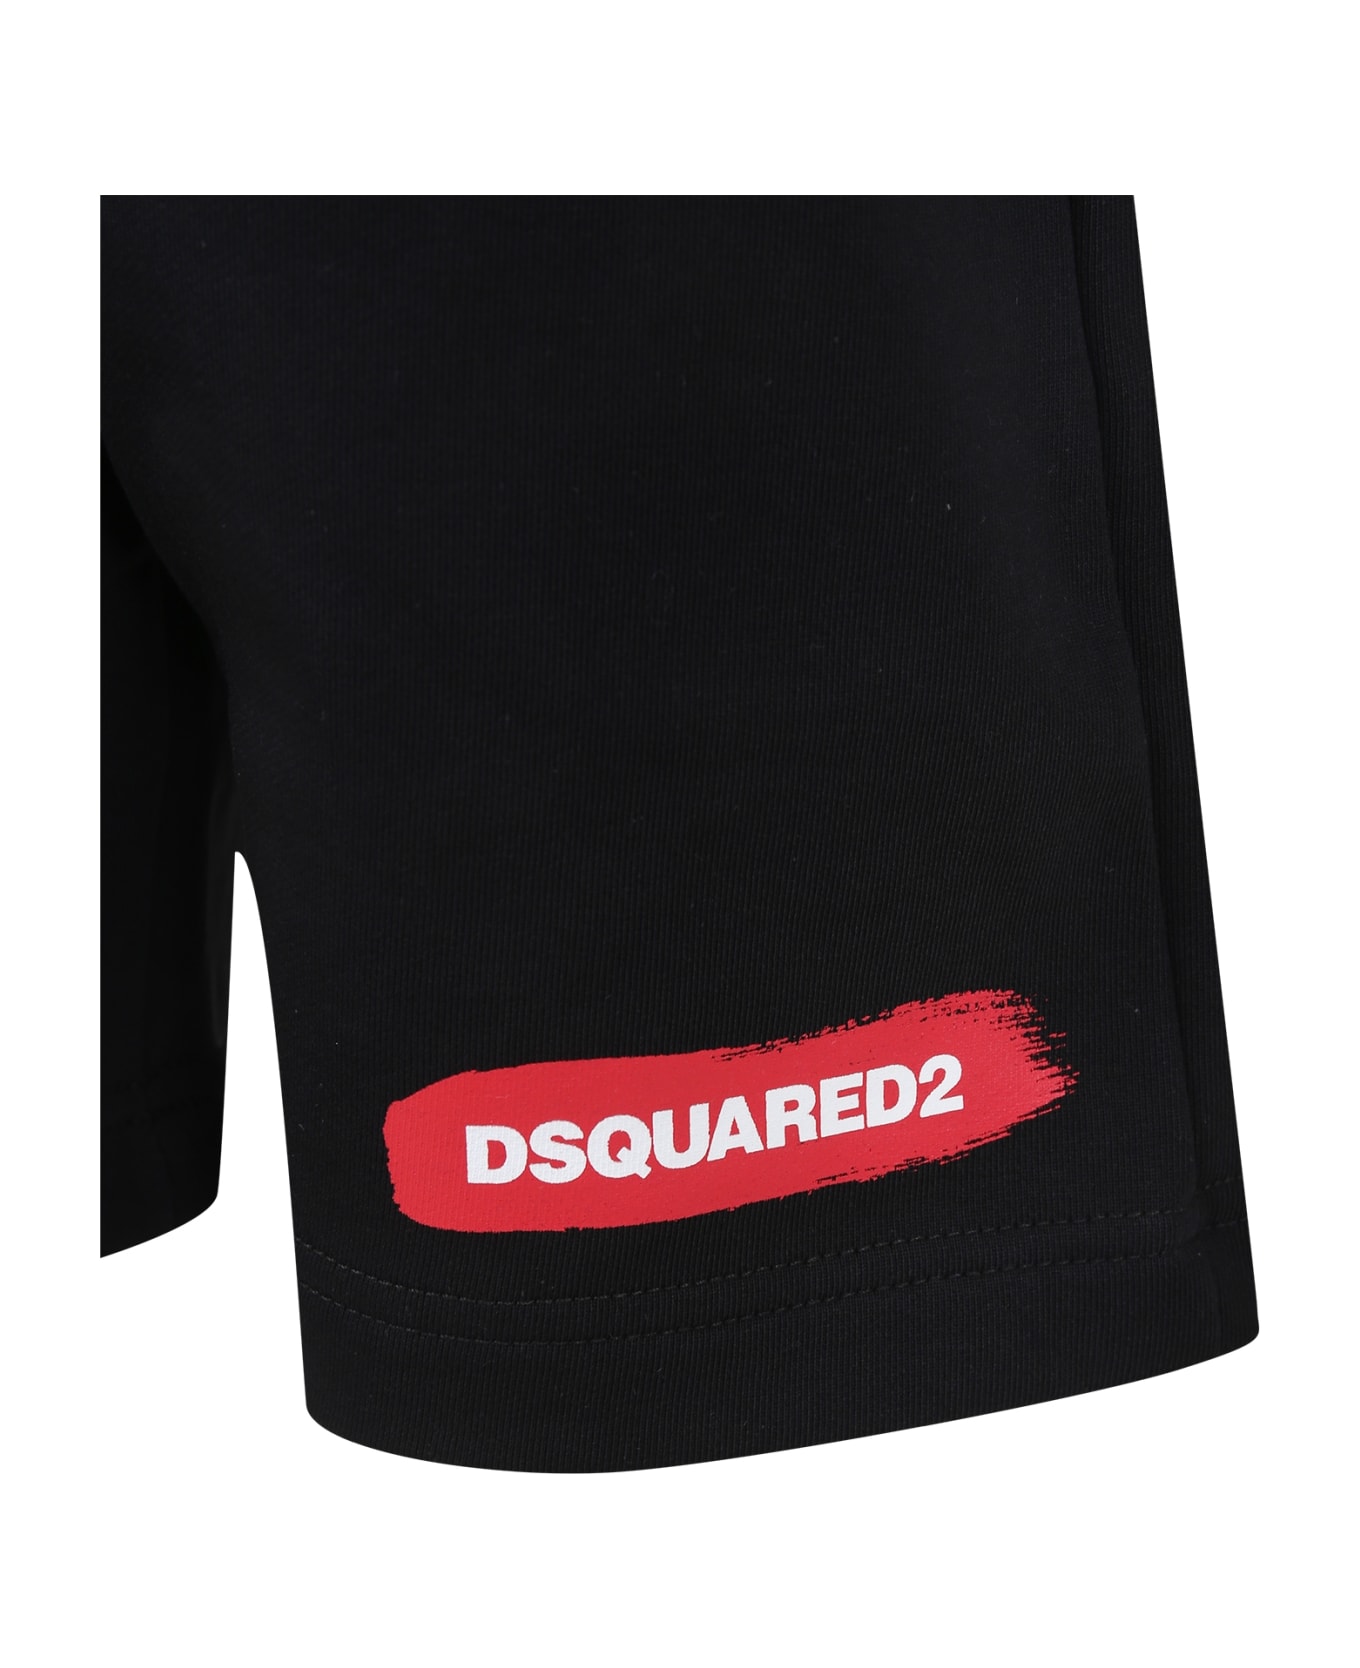 Dsquared2 Black Shorts For Boy With Logo